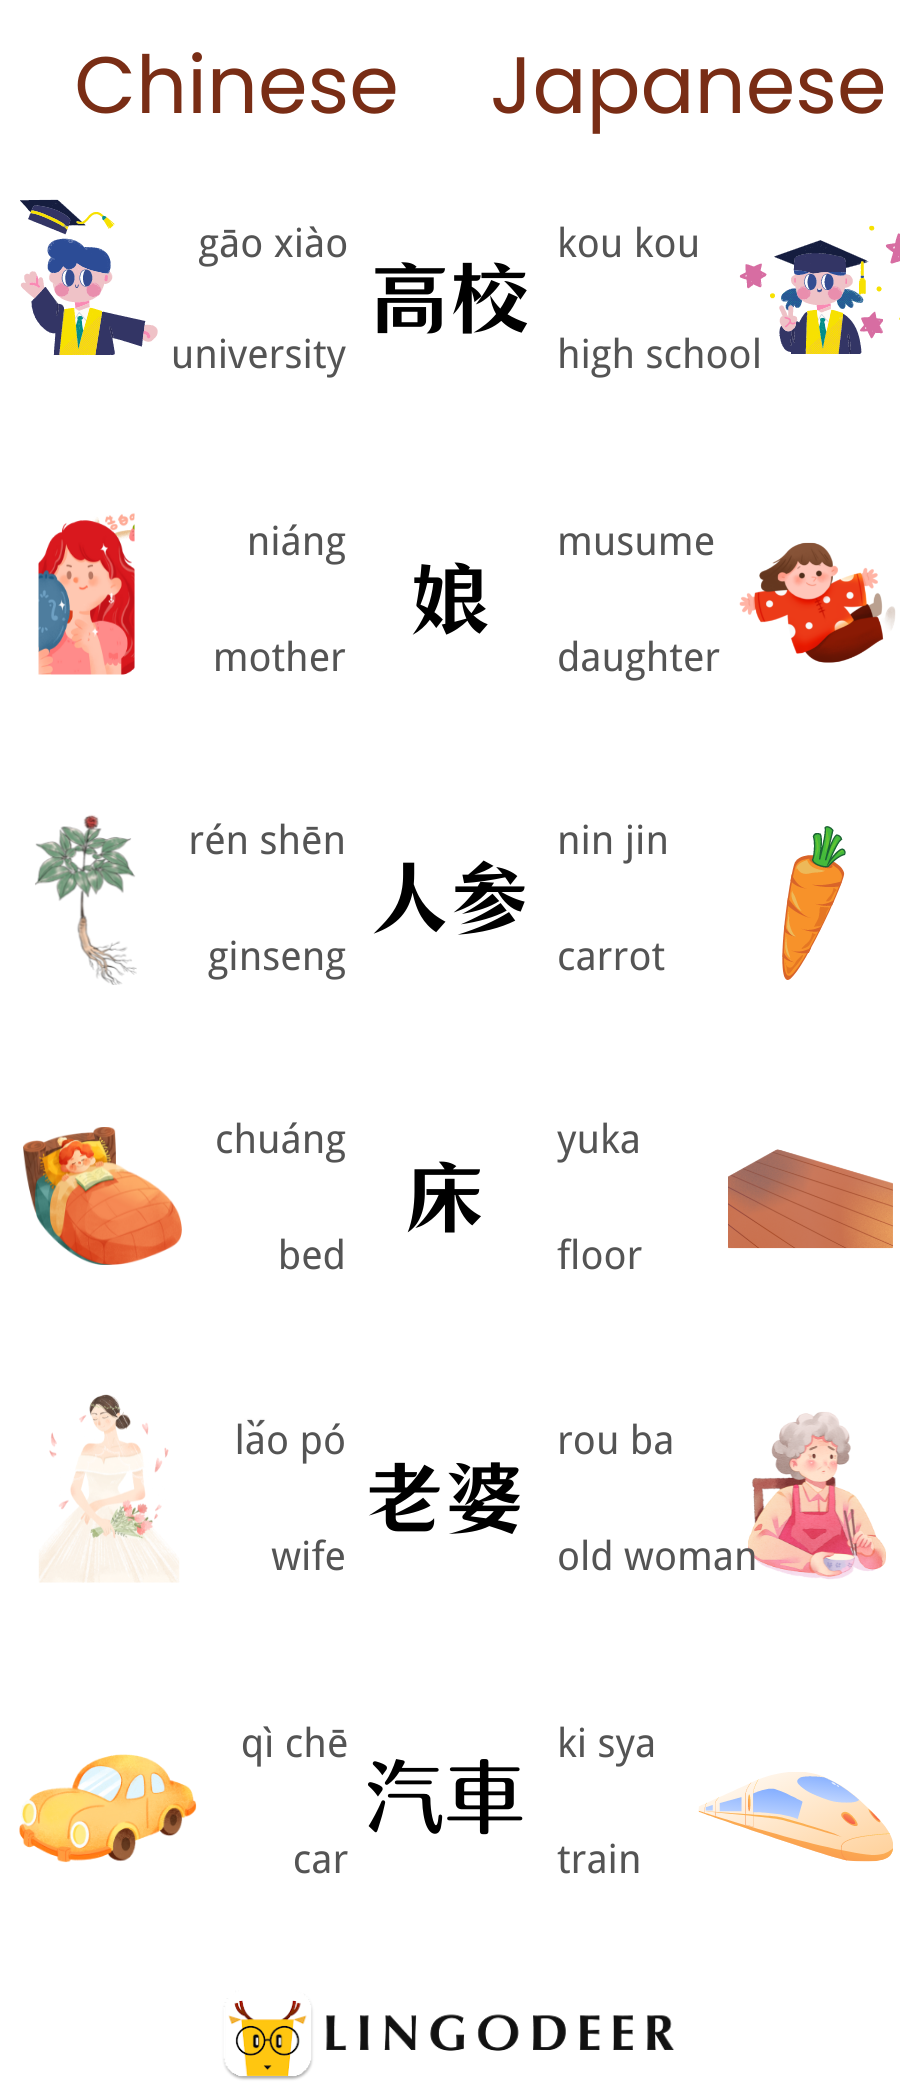 Which language is useful Chinese or Japanese?